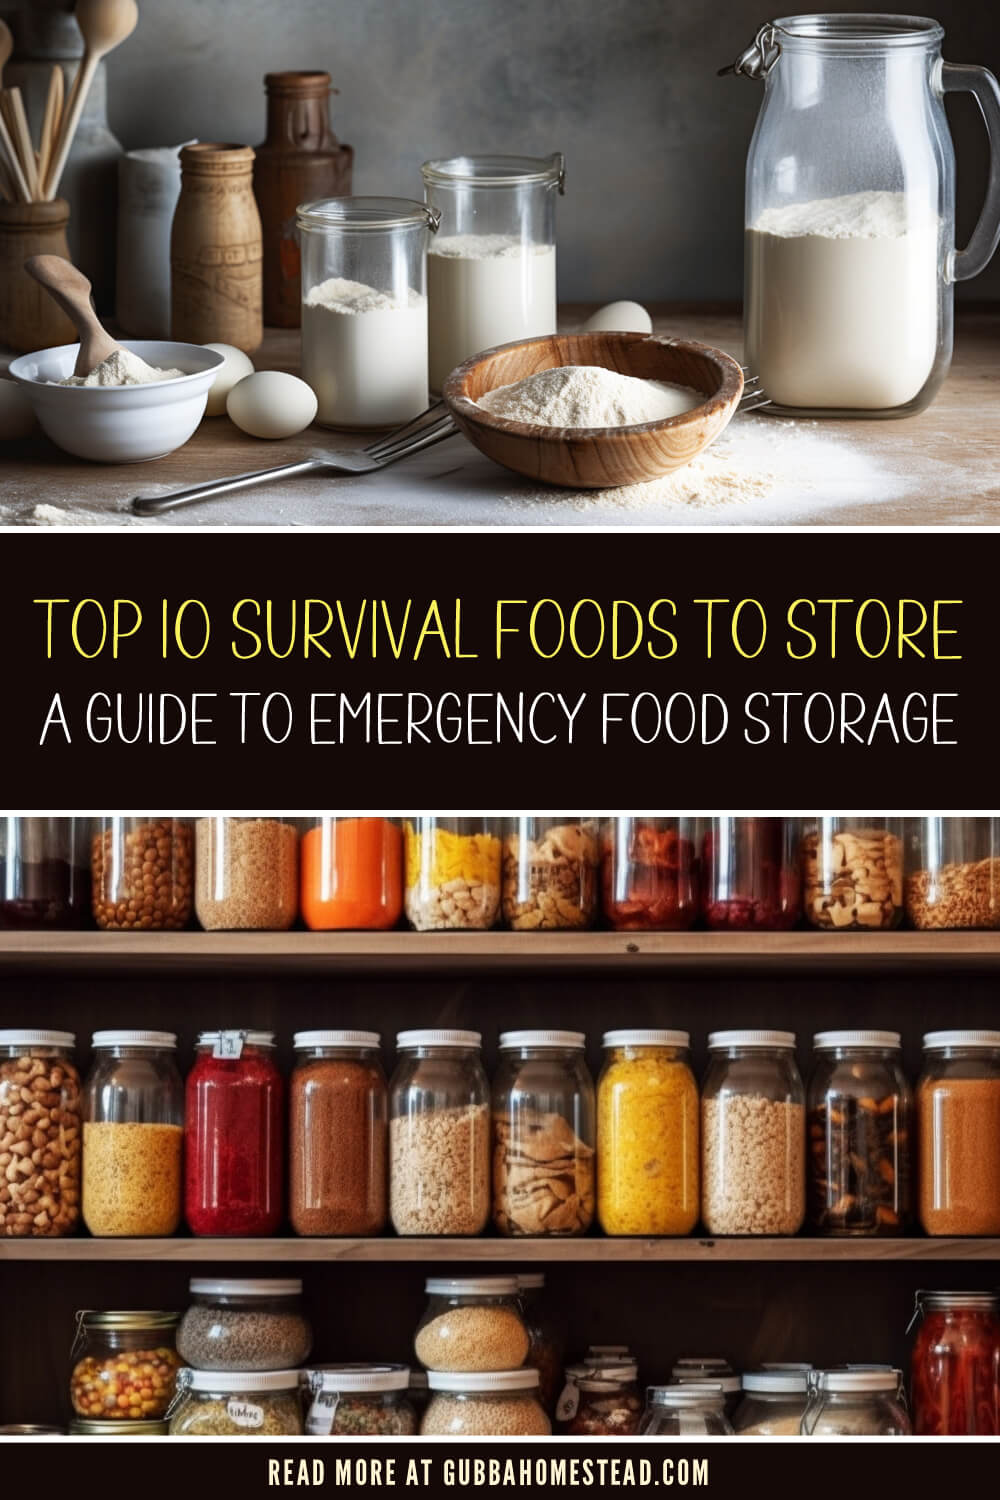 Top 10 Survival Foods to Store: A Guide to Emergency Food Storage